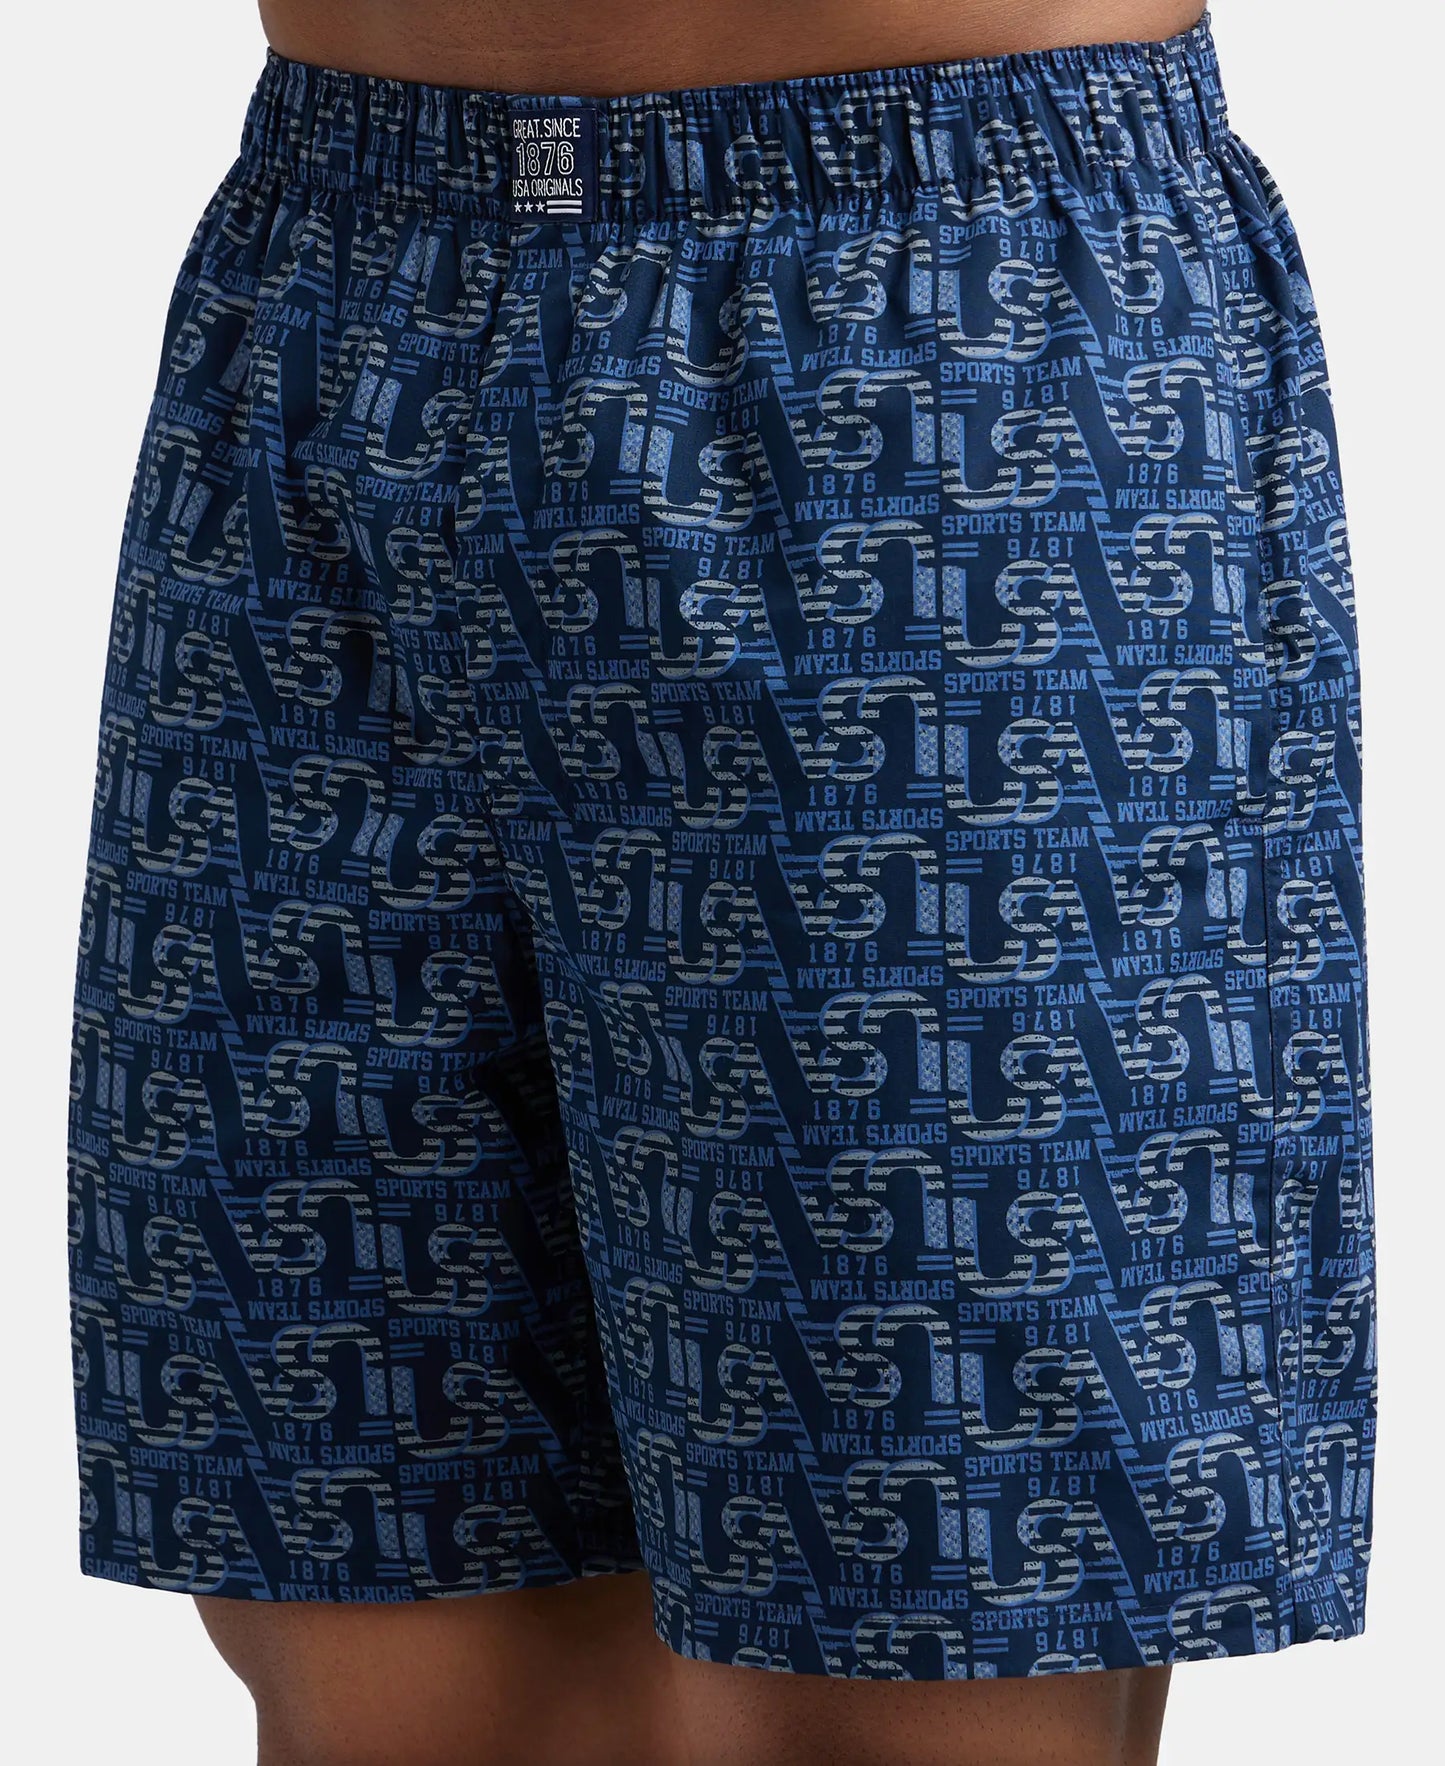 Super Combed Mercerized Cotton Woven Printed Boxer Shorts with Side Pocket - Navy Seaport Teal (Pack of 2)